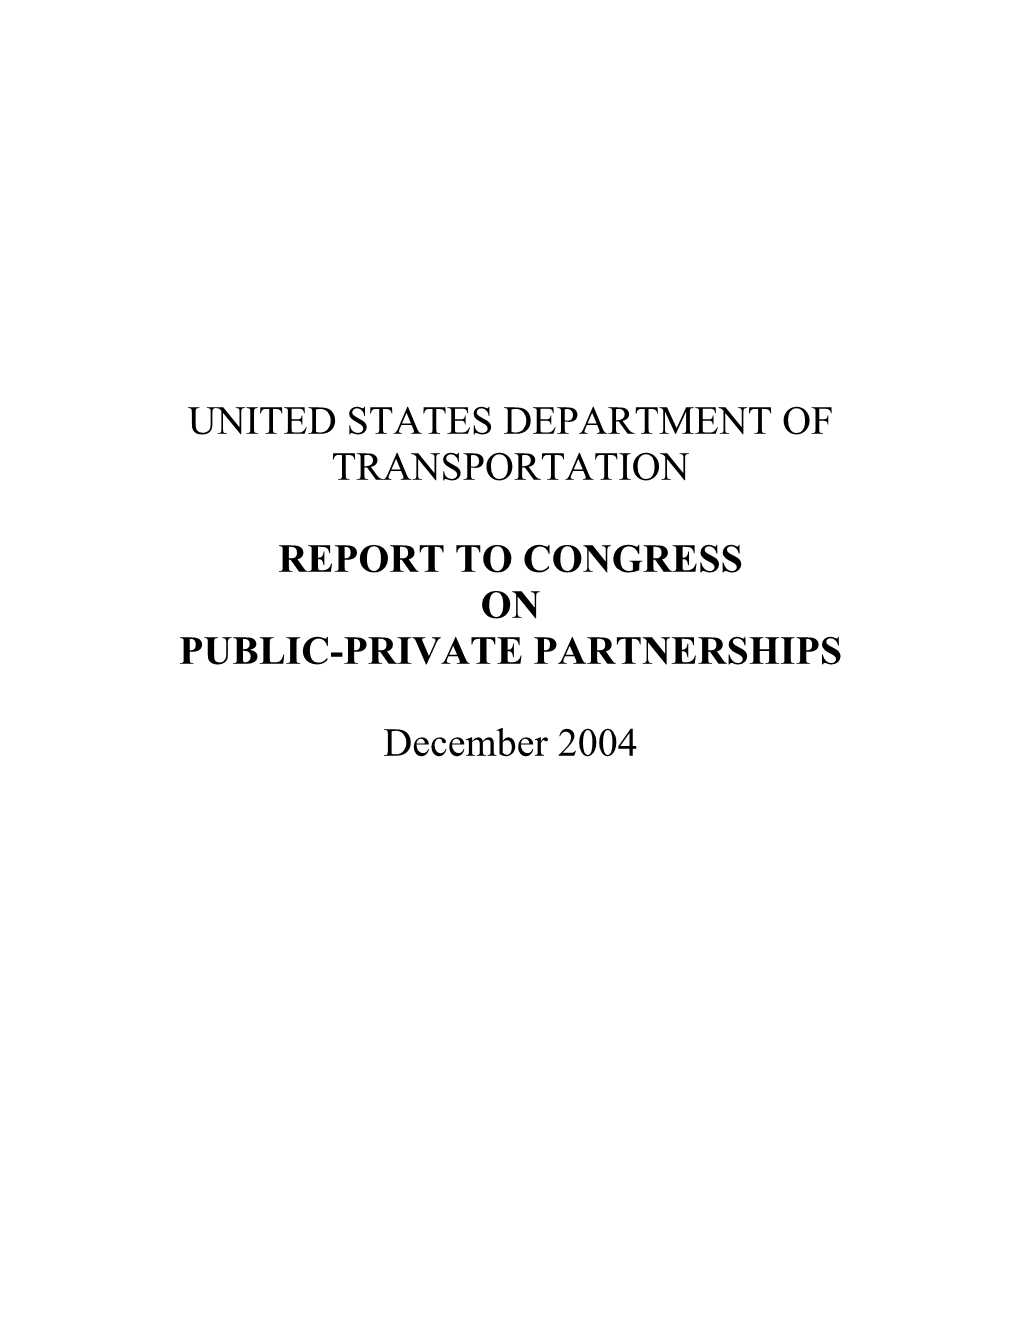 Report to Congress on Public-Private Partnerships